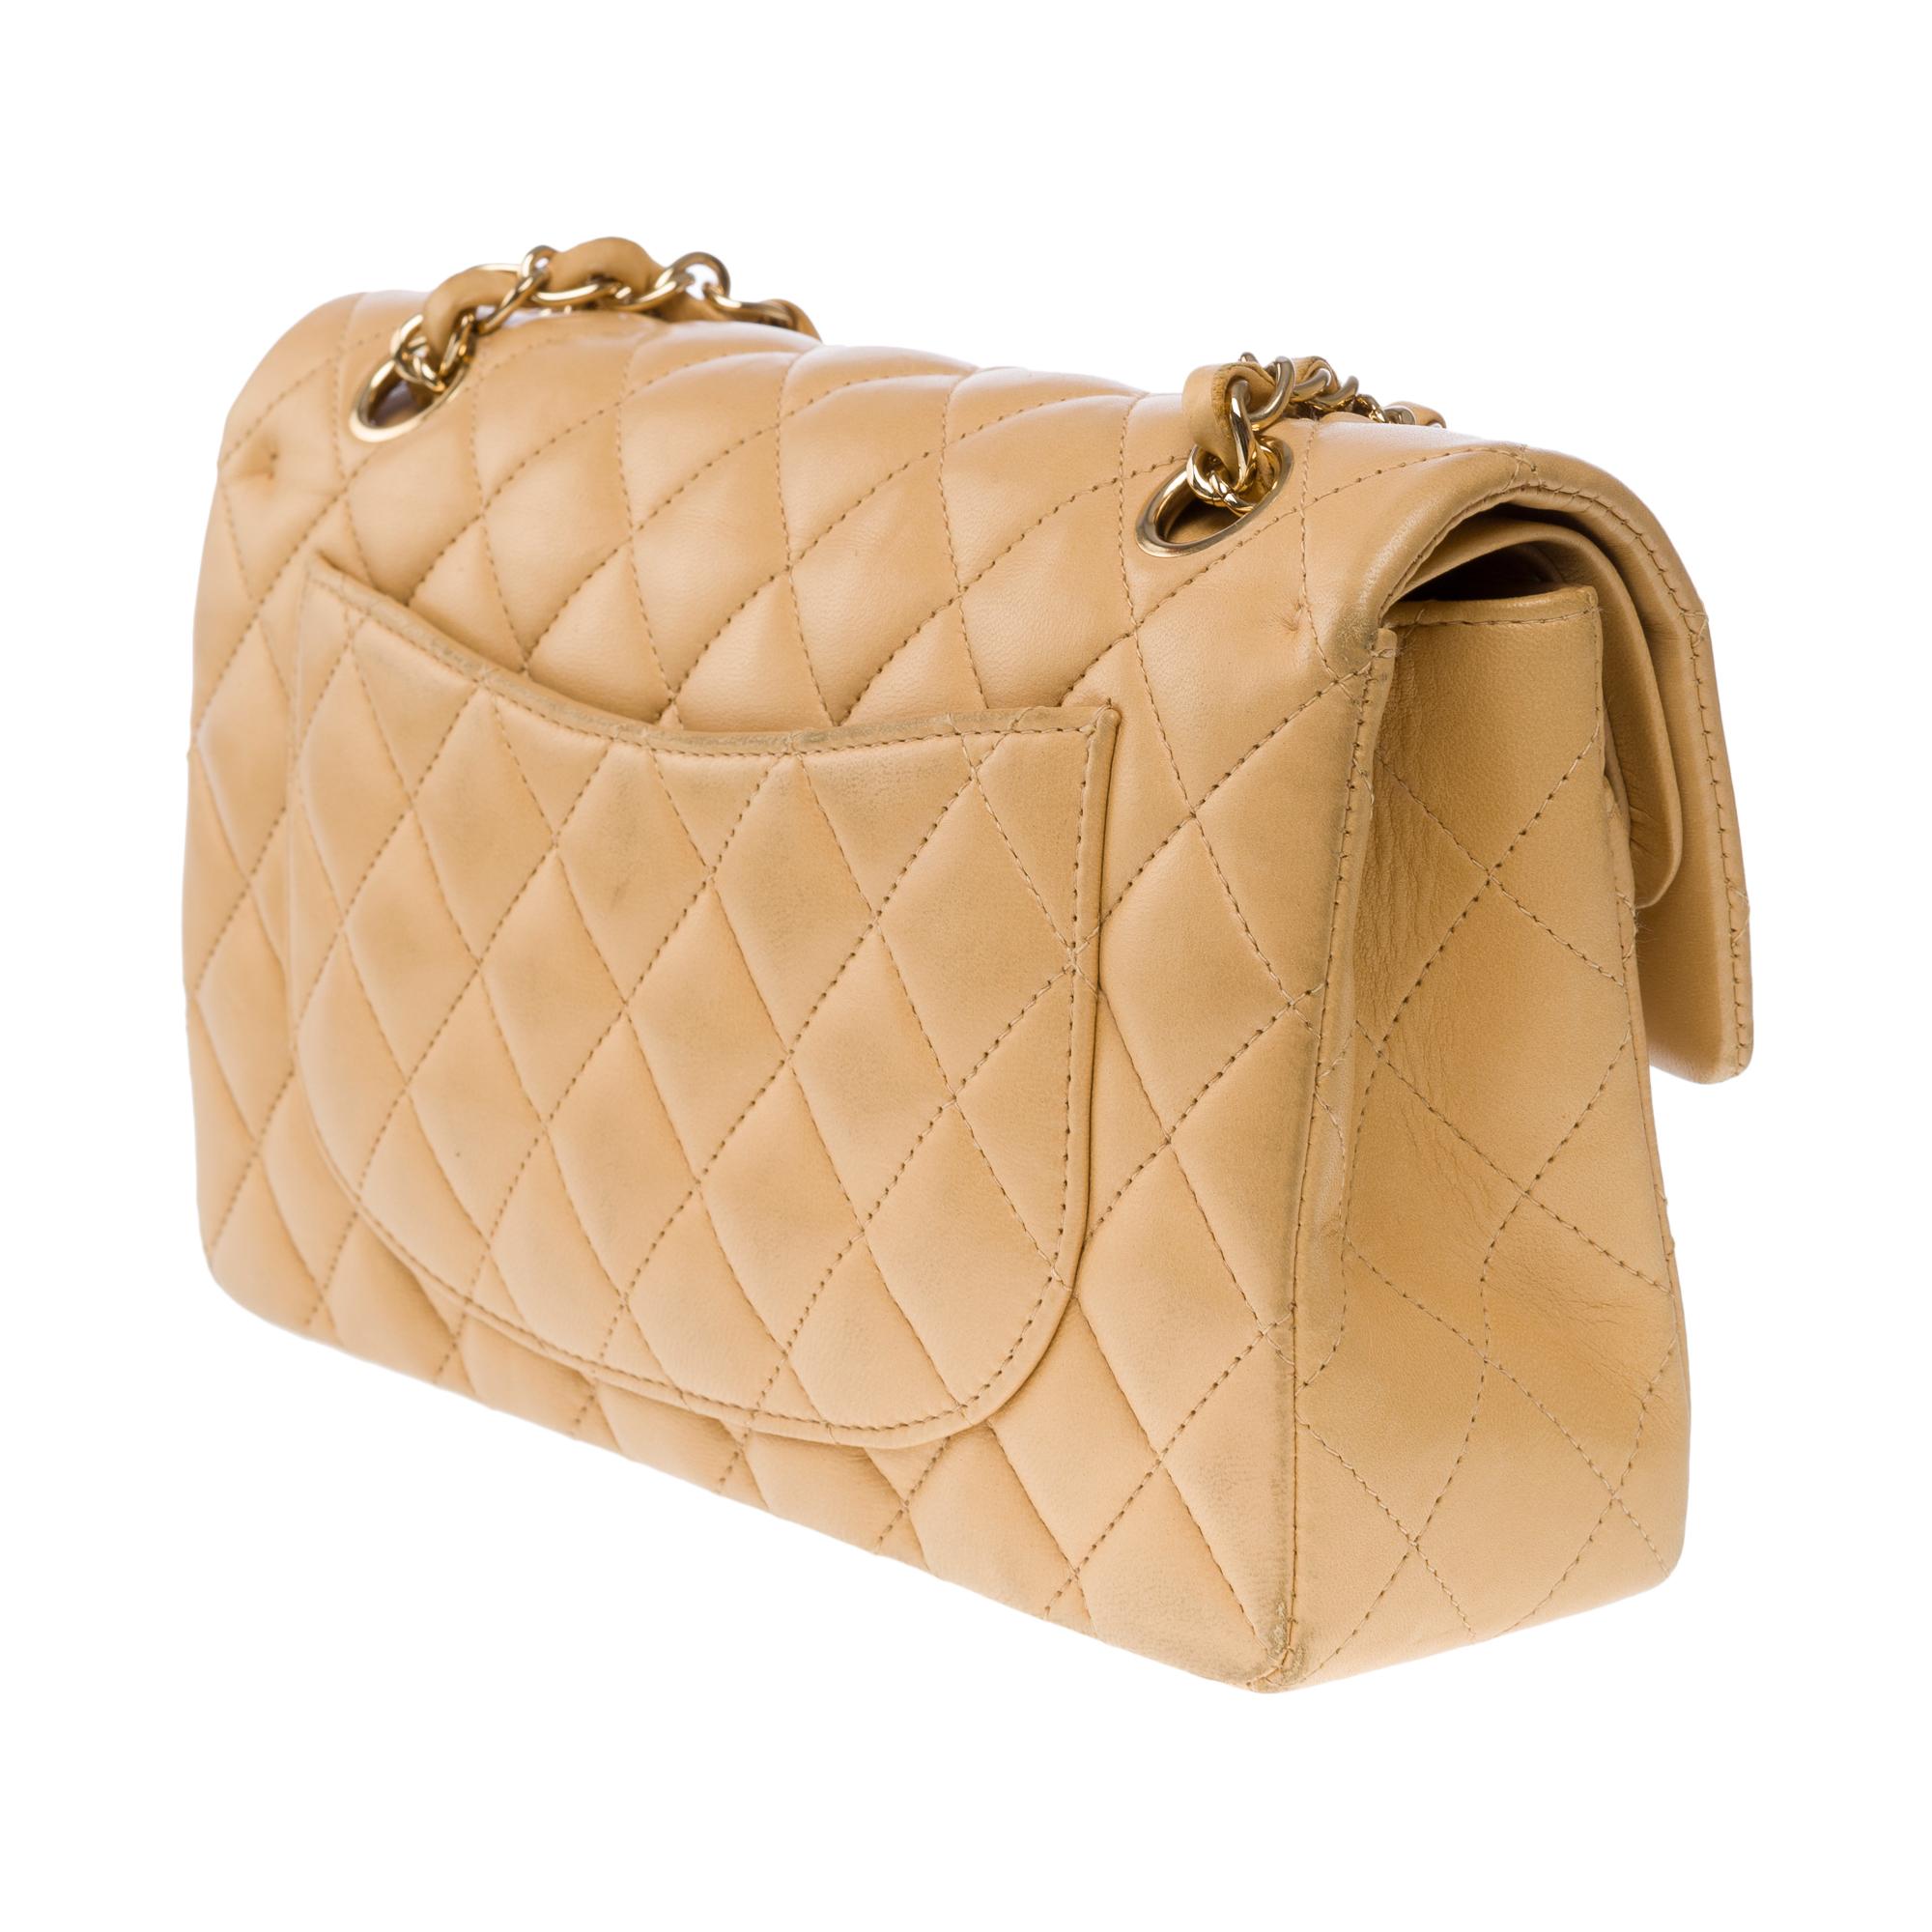 Chanel Timeless 23cm double flap shoulder bag in beige quilted lambskin, GHW For Sale 2